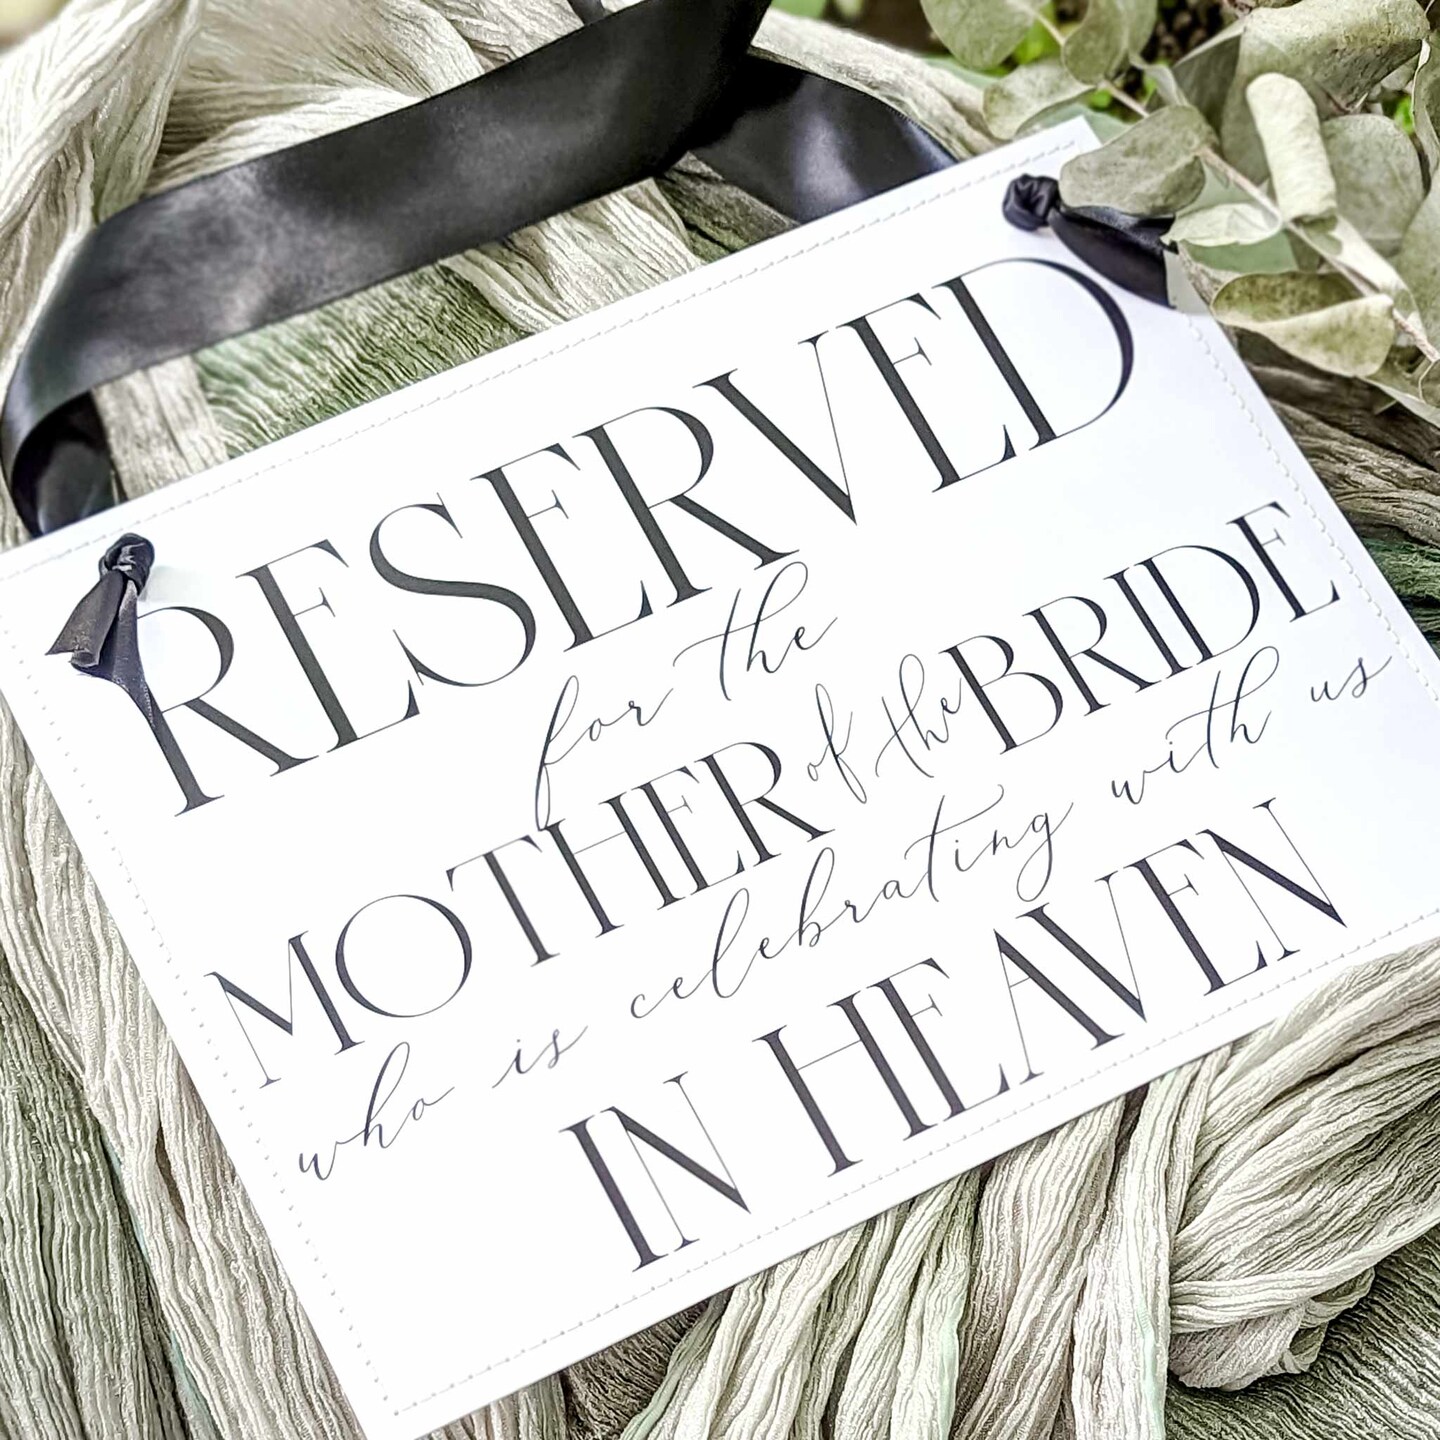 Ritzy Rose Mother of the Bride Memorial Sign - Black on 11x8in White Linen Cardstock with Black Ribbon